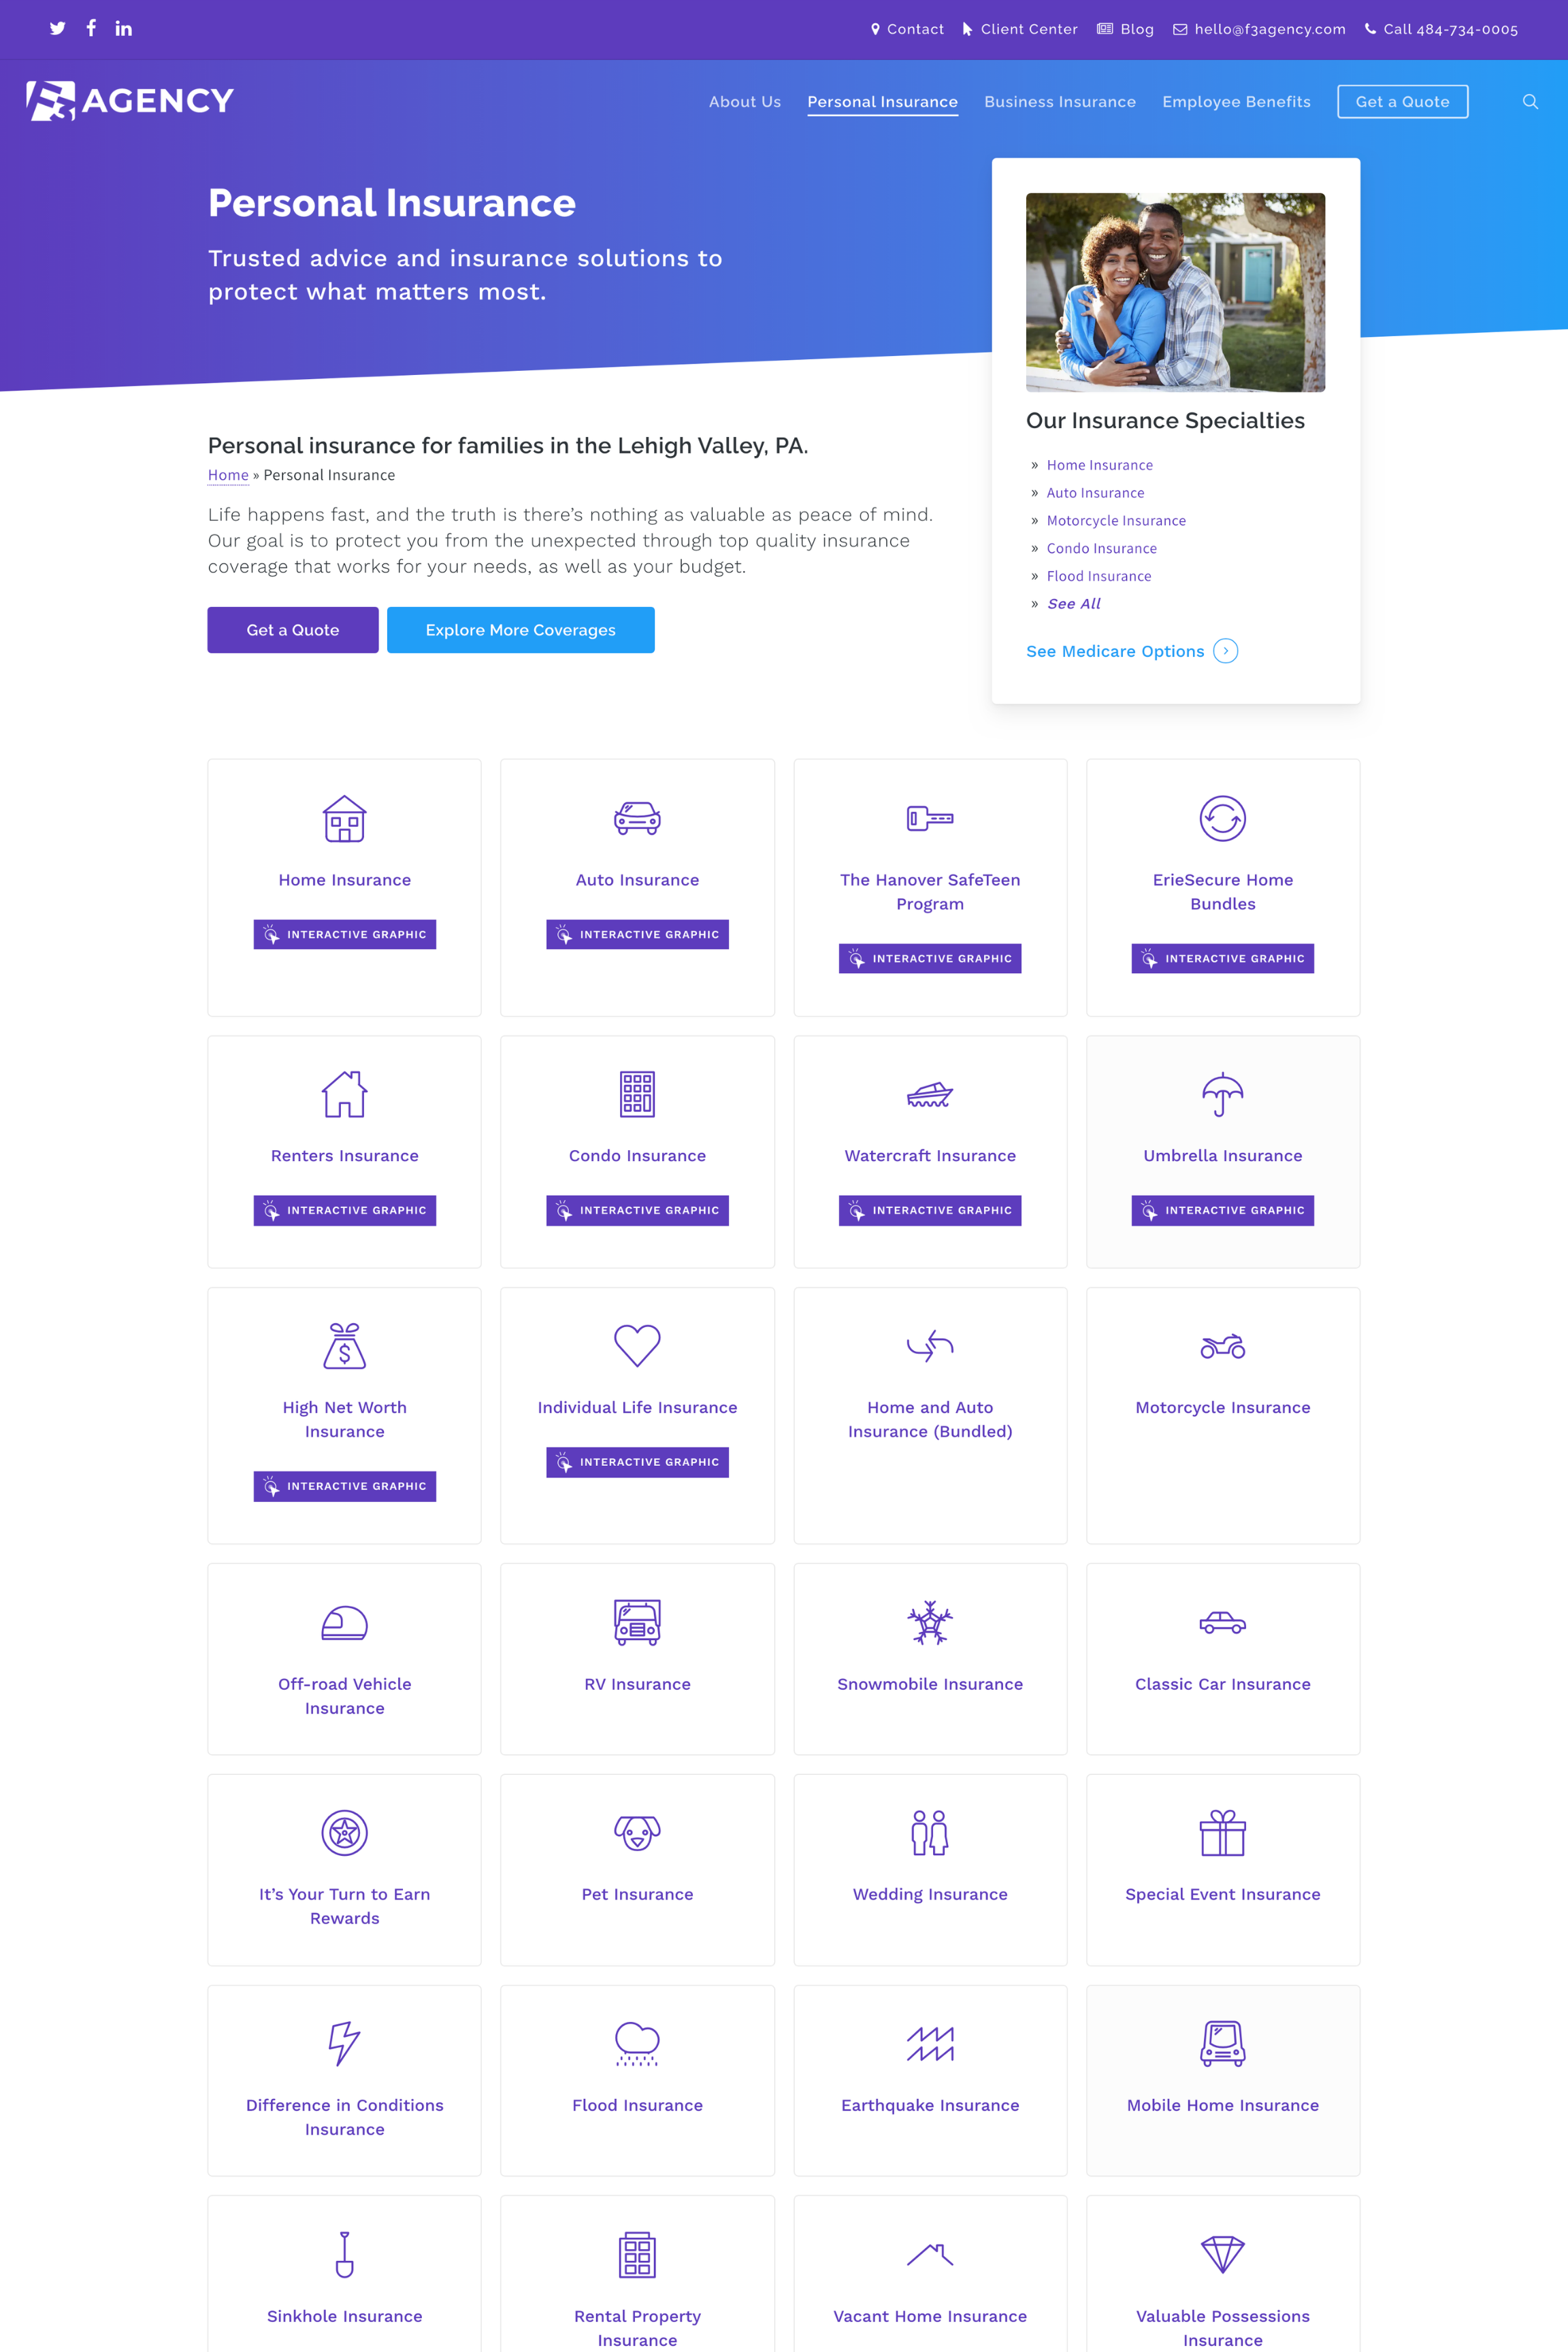 Product Grid page